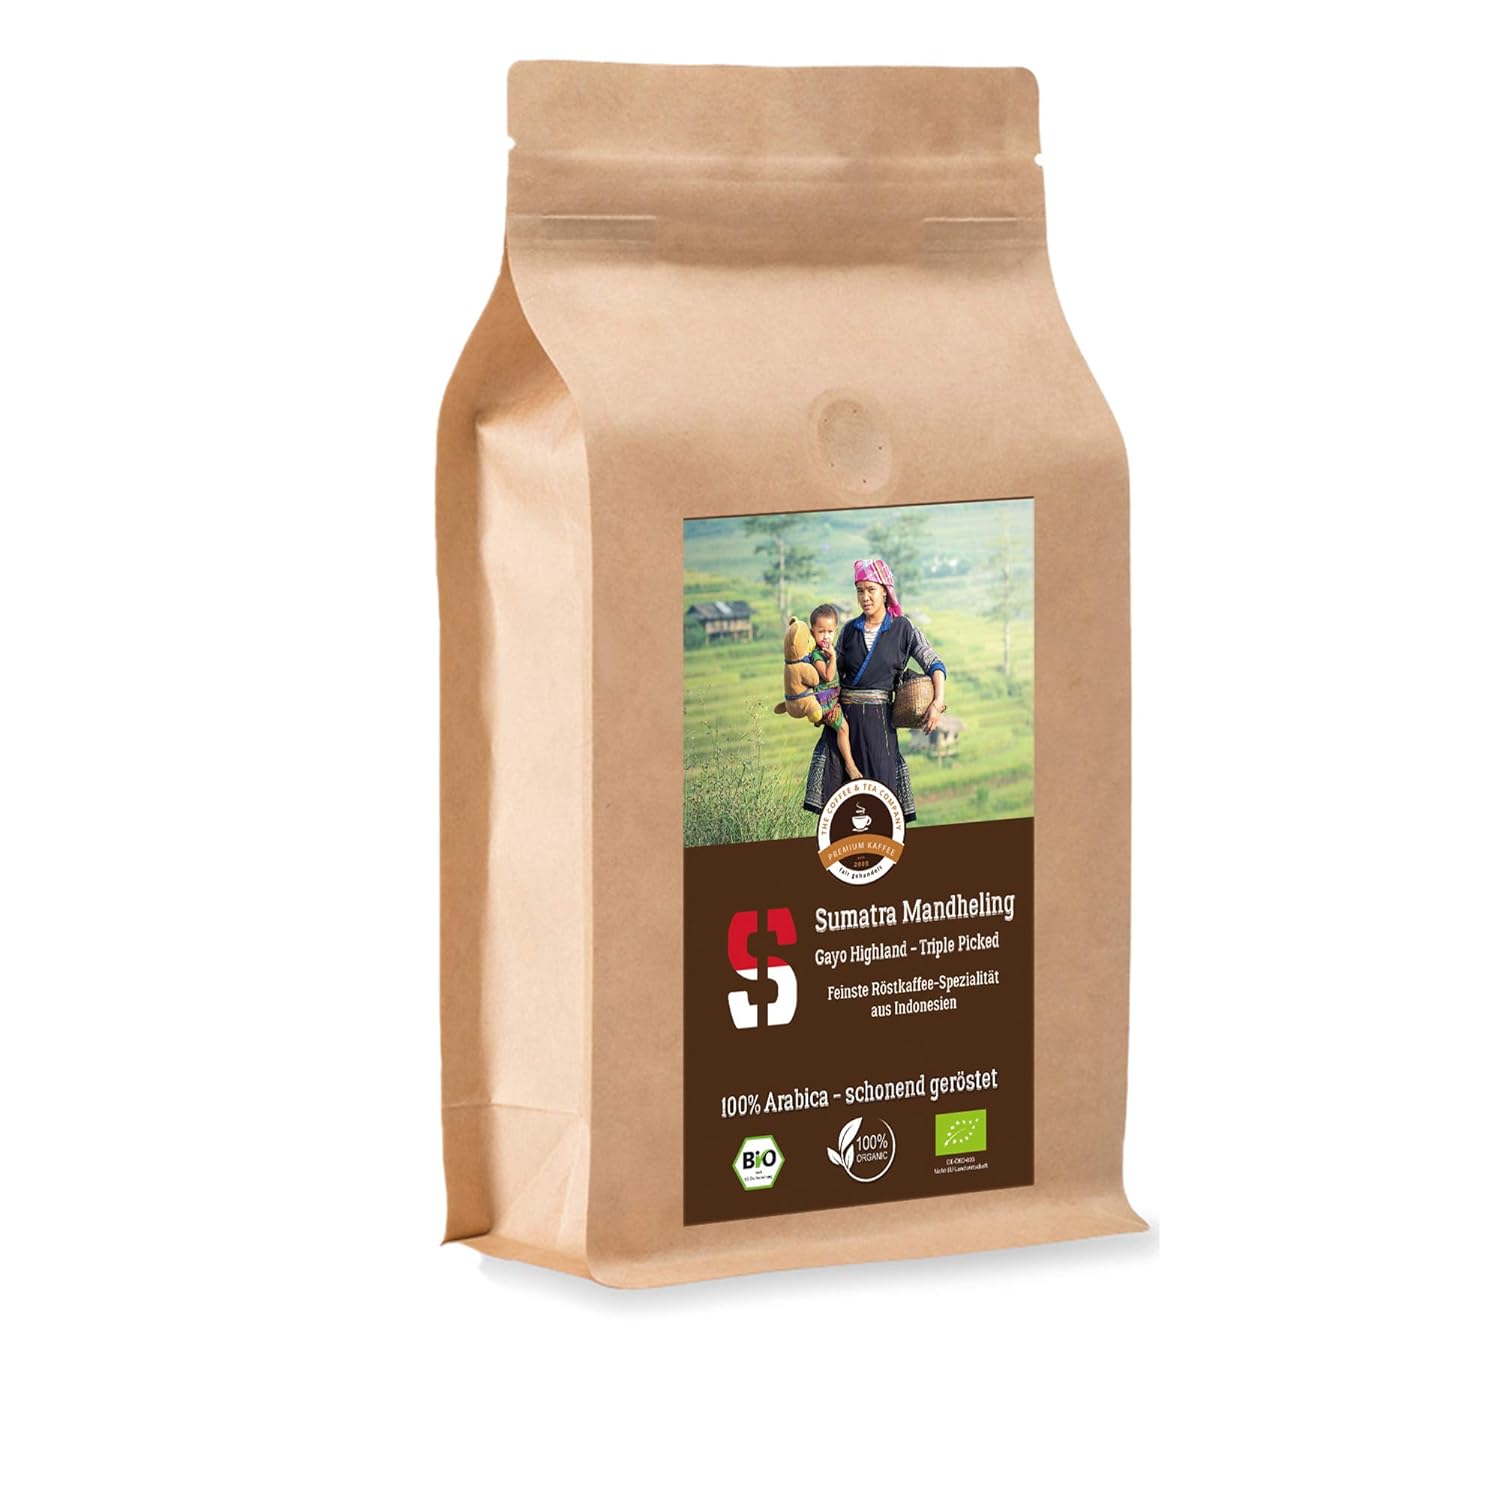 Coffee Globetrotter - Sumatra Mandheling Gayo Highland - Organic - 1000 g Coarse Ground - for Stamp Jug French Press Coffee Maker - Top Coffee - Roasted Coffee from Organic Cultivation